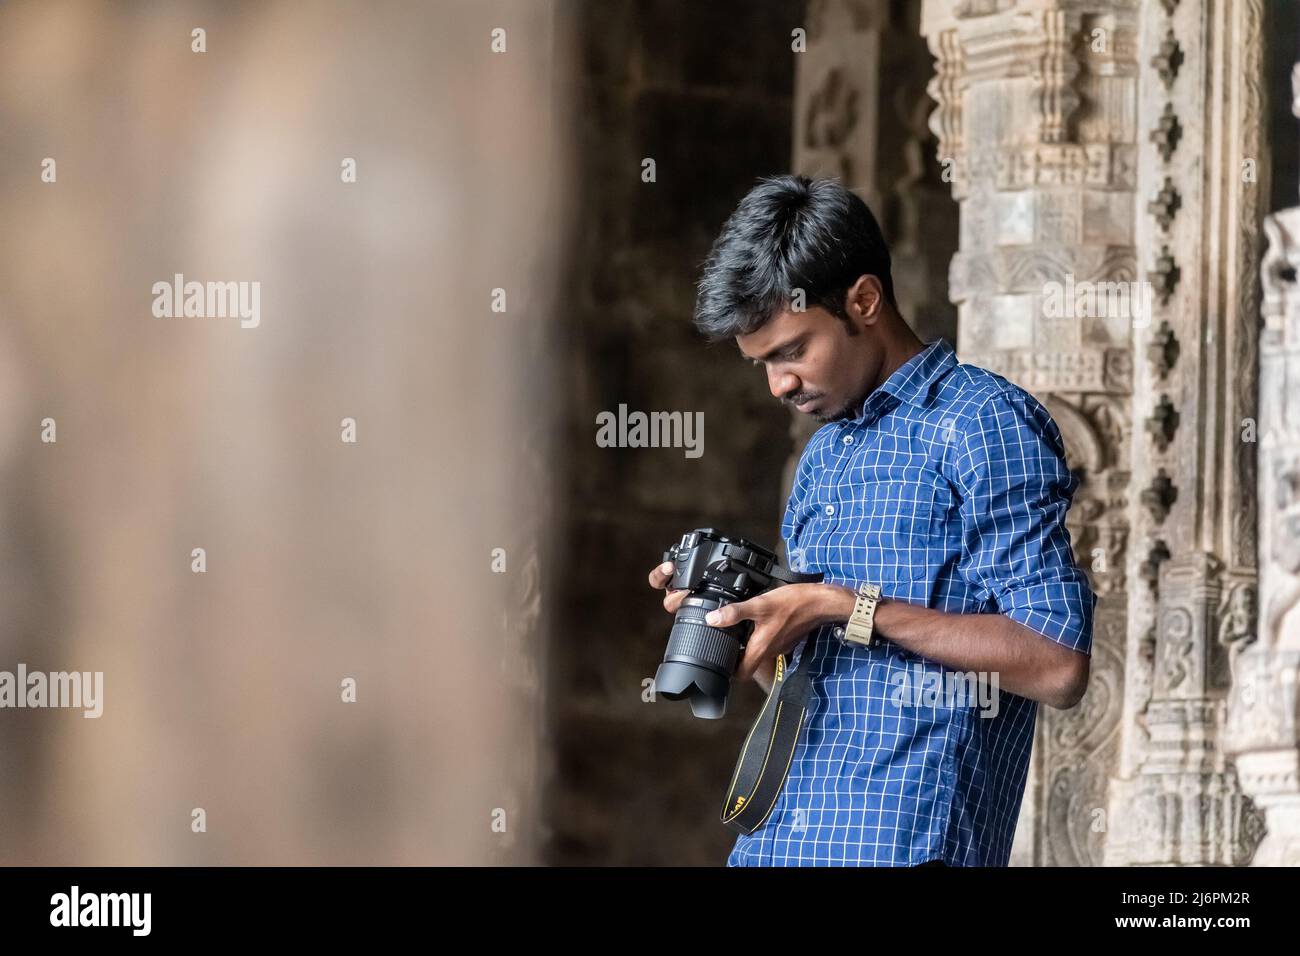 Vellore, Tamil Nadu, India - September 2018: An Indian male tourist photographer checking images on his camera at the ancient Vellore fort temple. Stock Photo